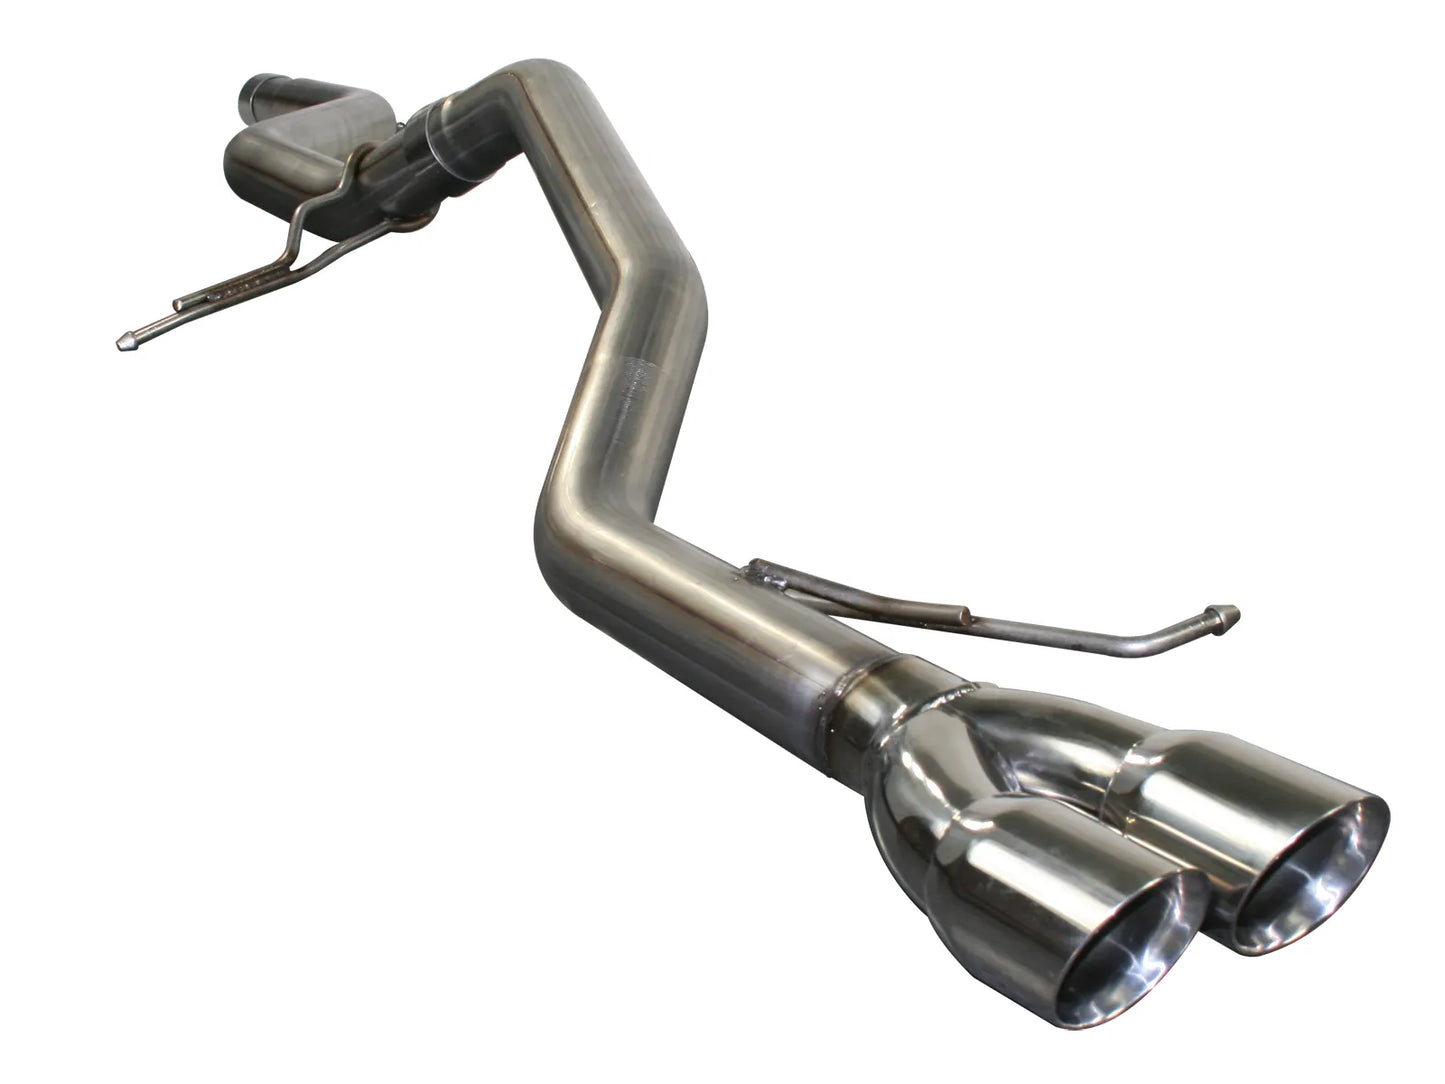 aFe Large Bore-HD Cat-Back Exhaust System for 2011-2014 Volkswagen Jetta (49-46401)